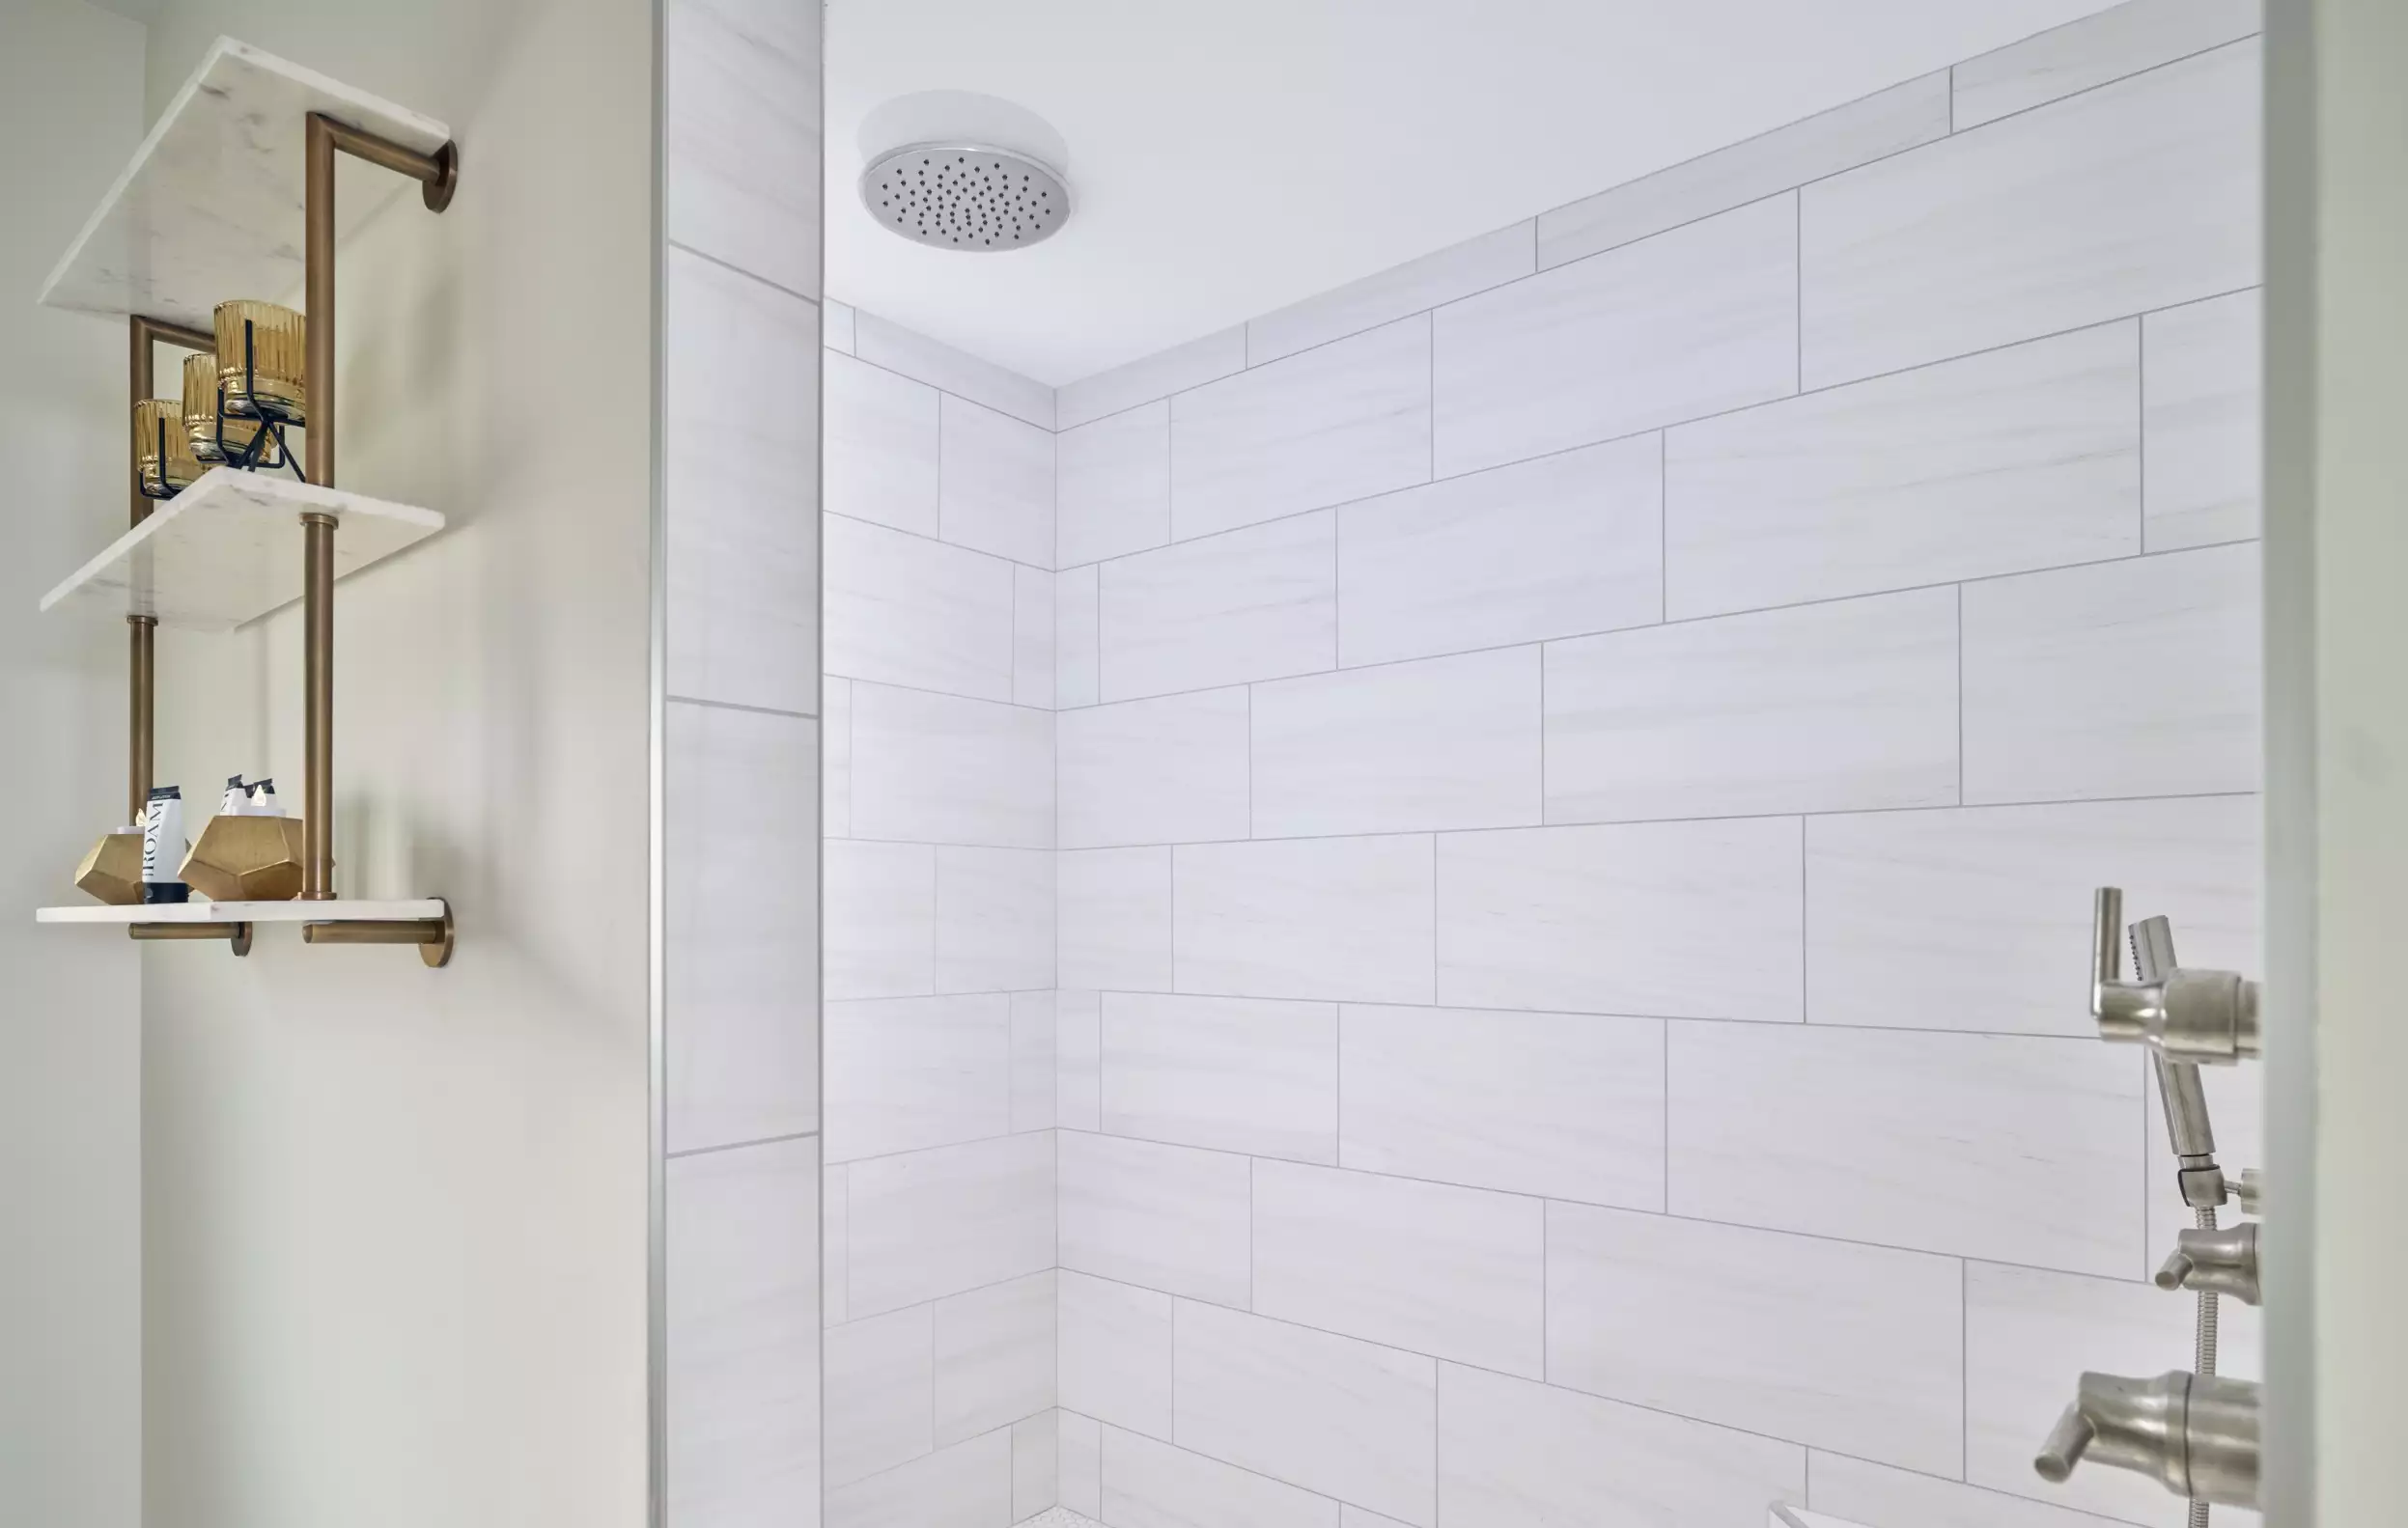 Walk in shower with a rainfall shower head and modern finishes